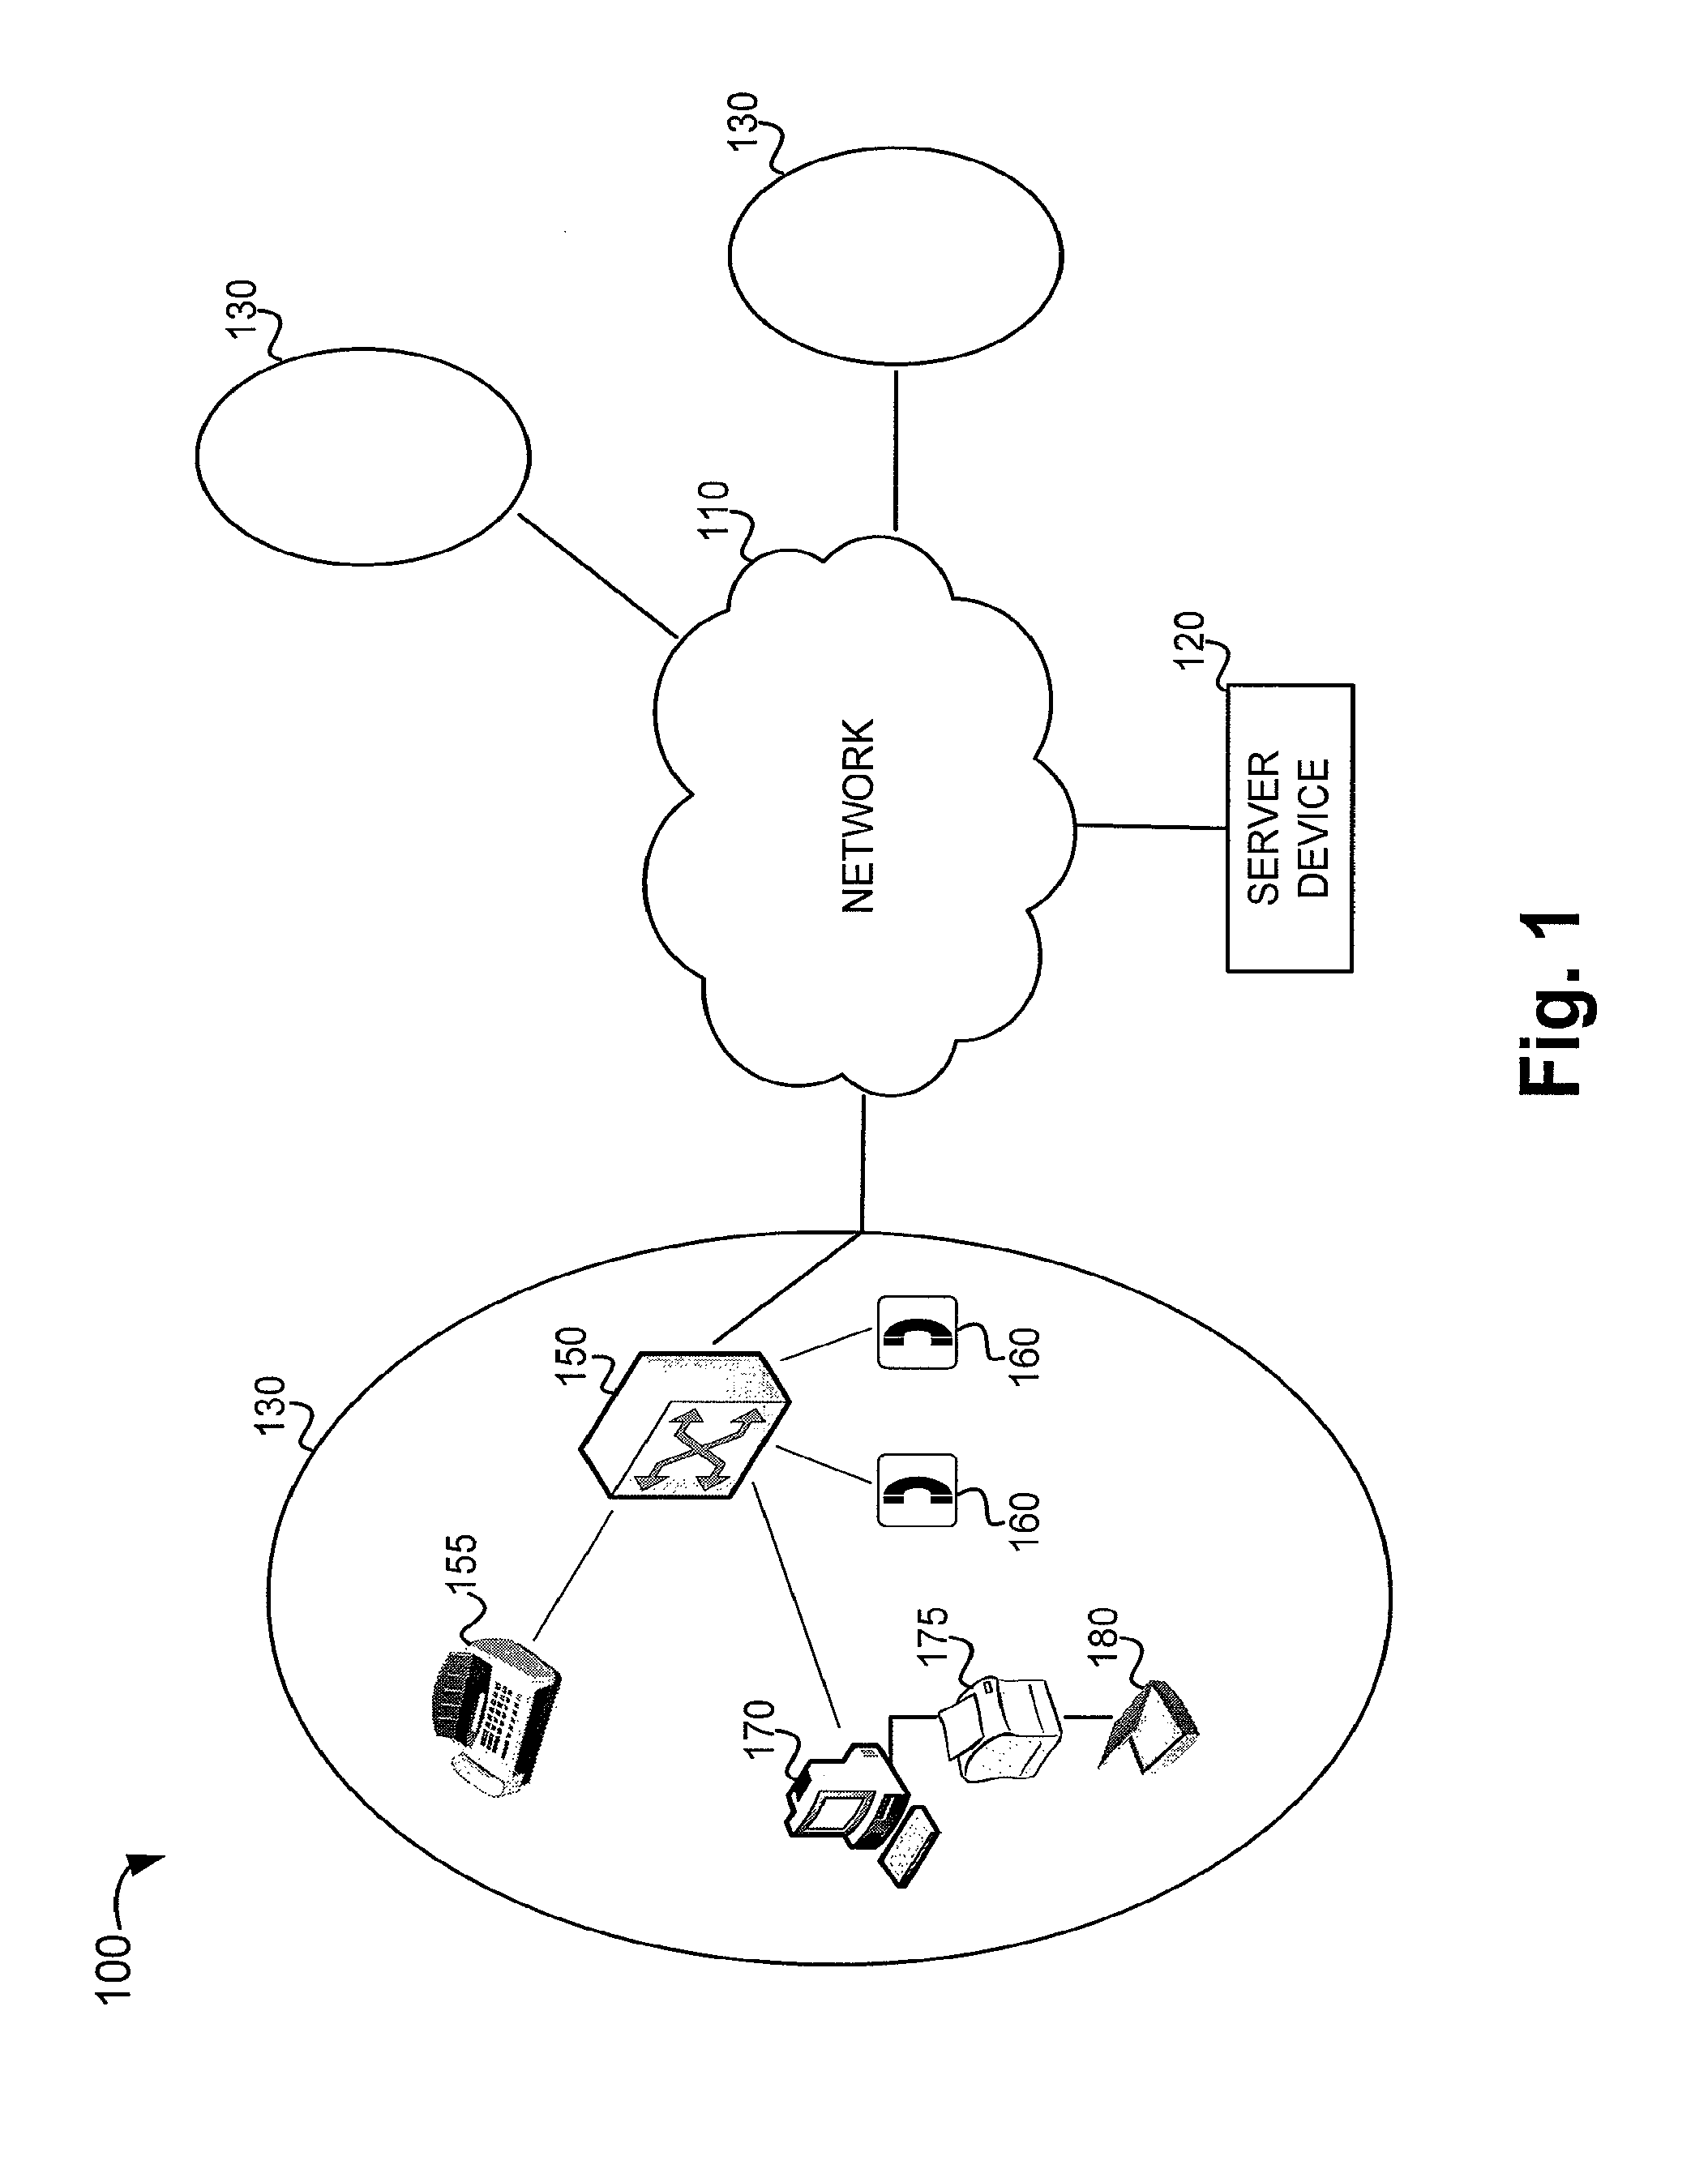 Facsimile device for directly communicating over IP networks